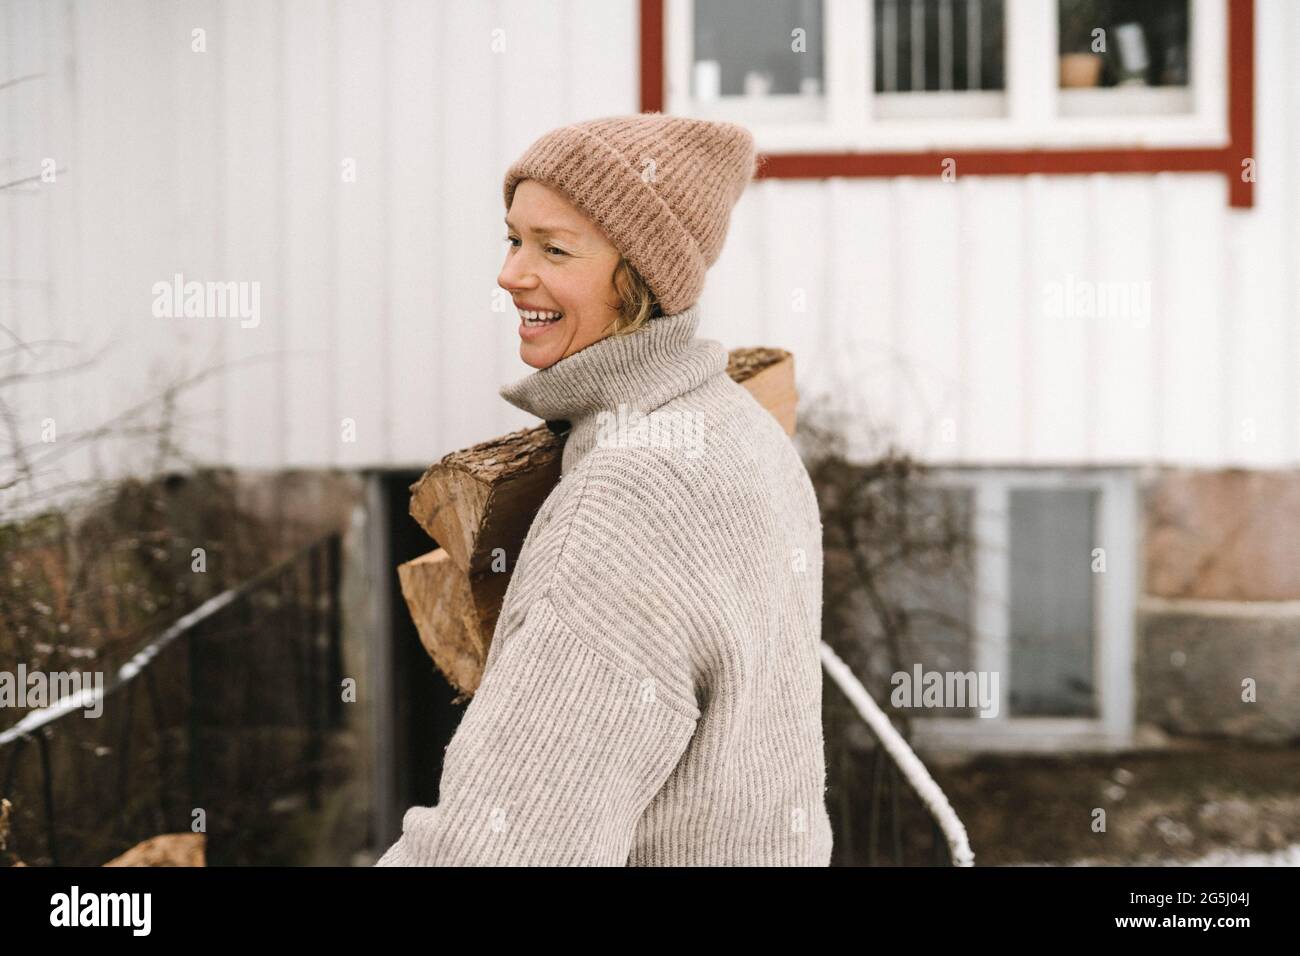 Smiling woman wearing knit hat carrying firewood while looking away Stock Photo